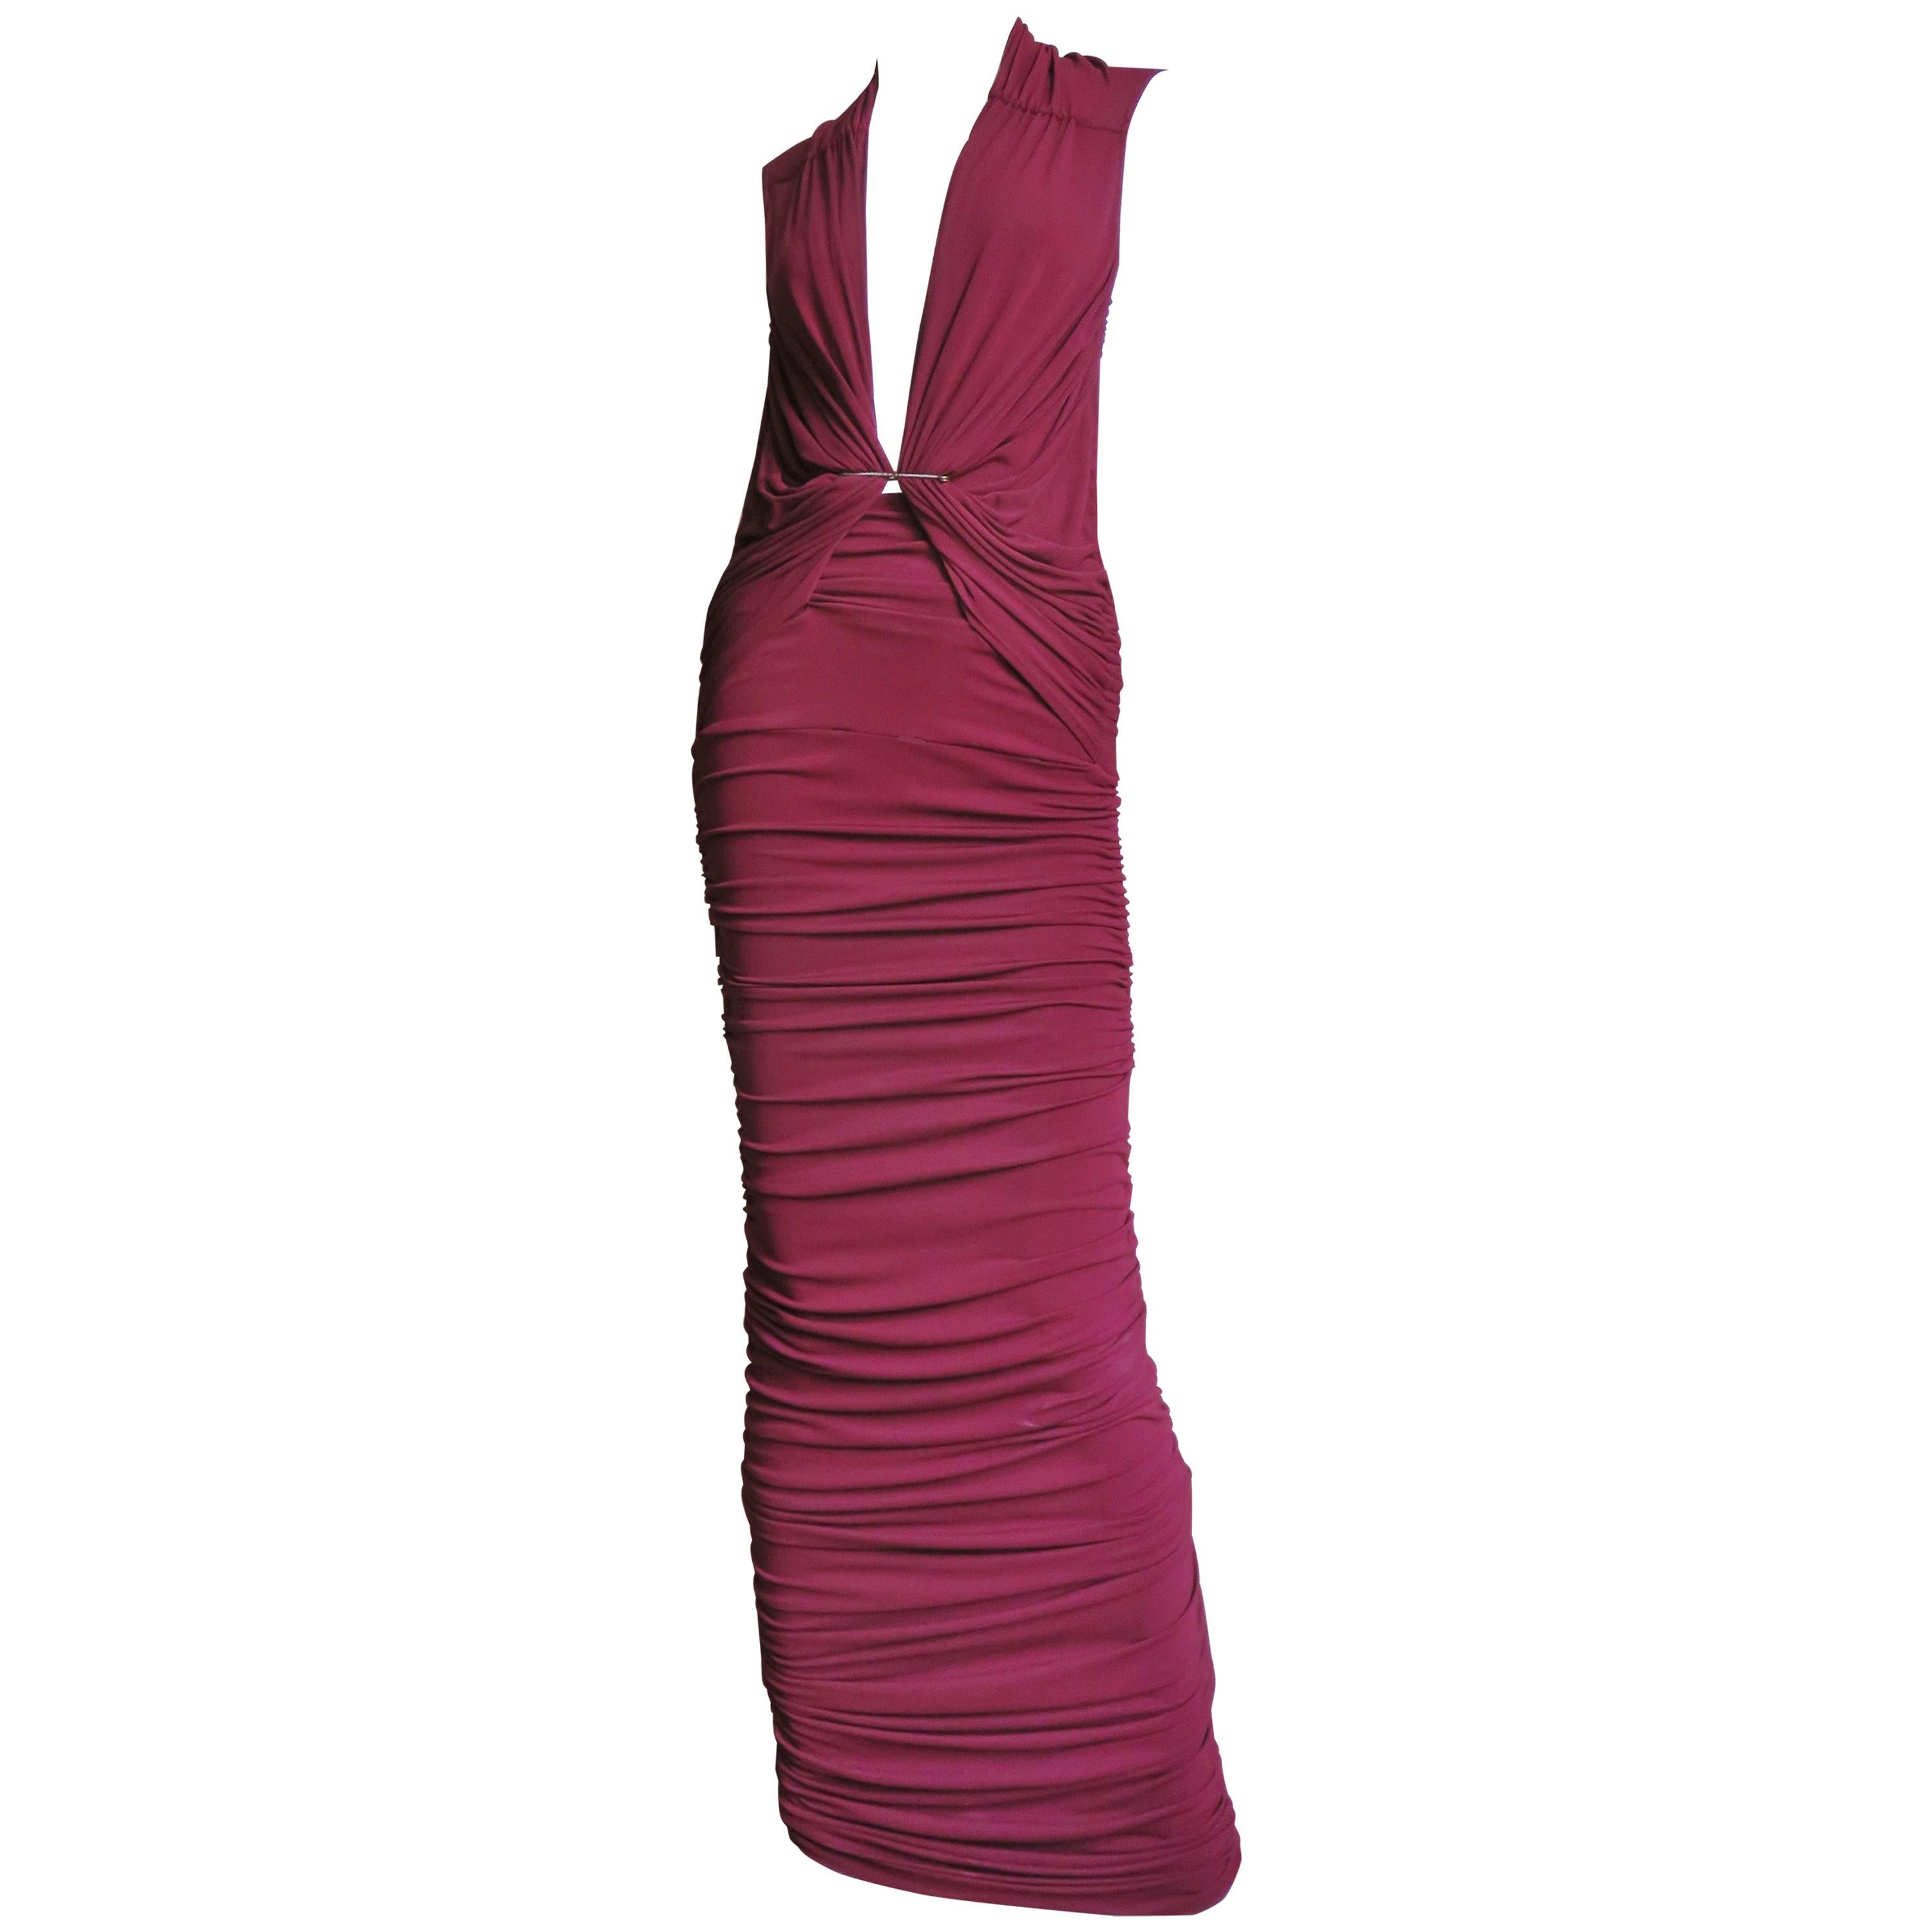 A gorgeous burgundy fine silk jersey gown from Lanvin.  It has a plunging neckline, exposed side bodice and fabulous ruching all meeting held together with large a horizontal saety pin.  The dress has horizontal ruched across the the entire length